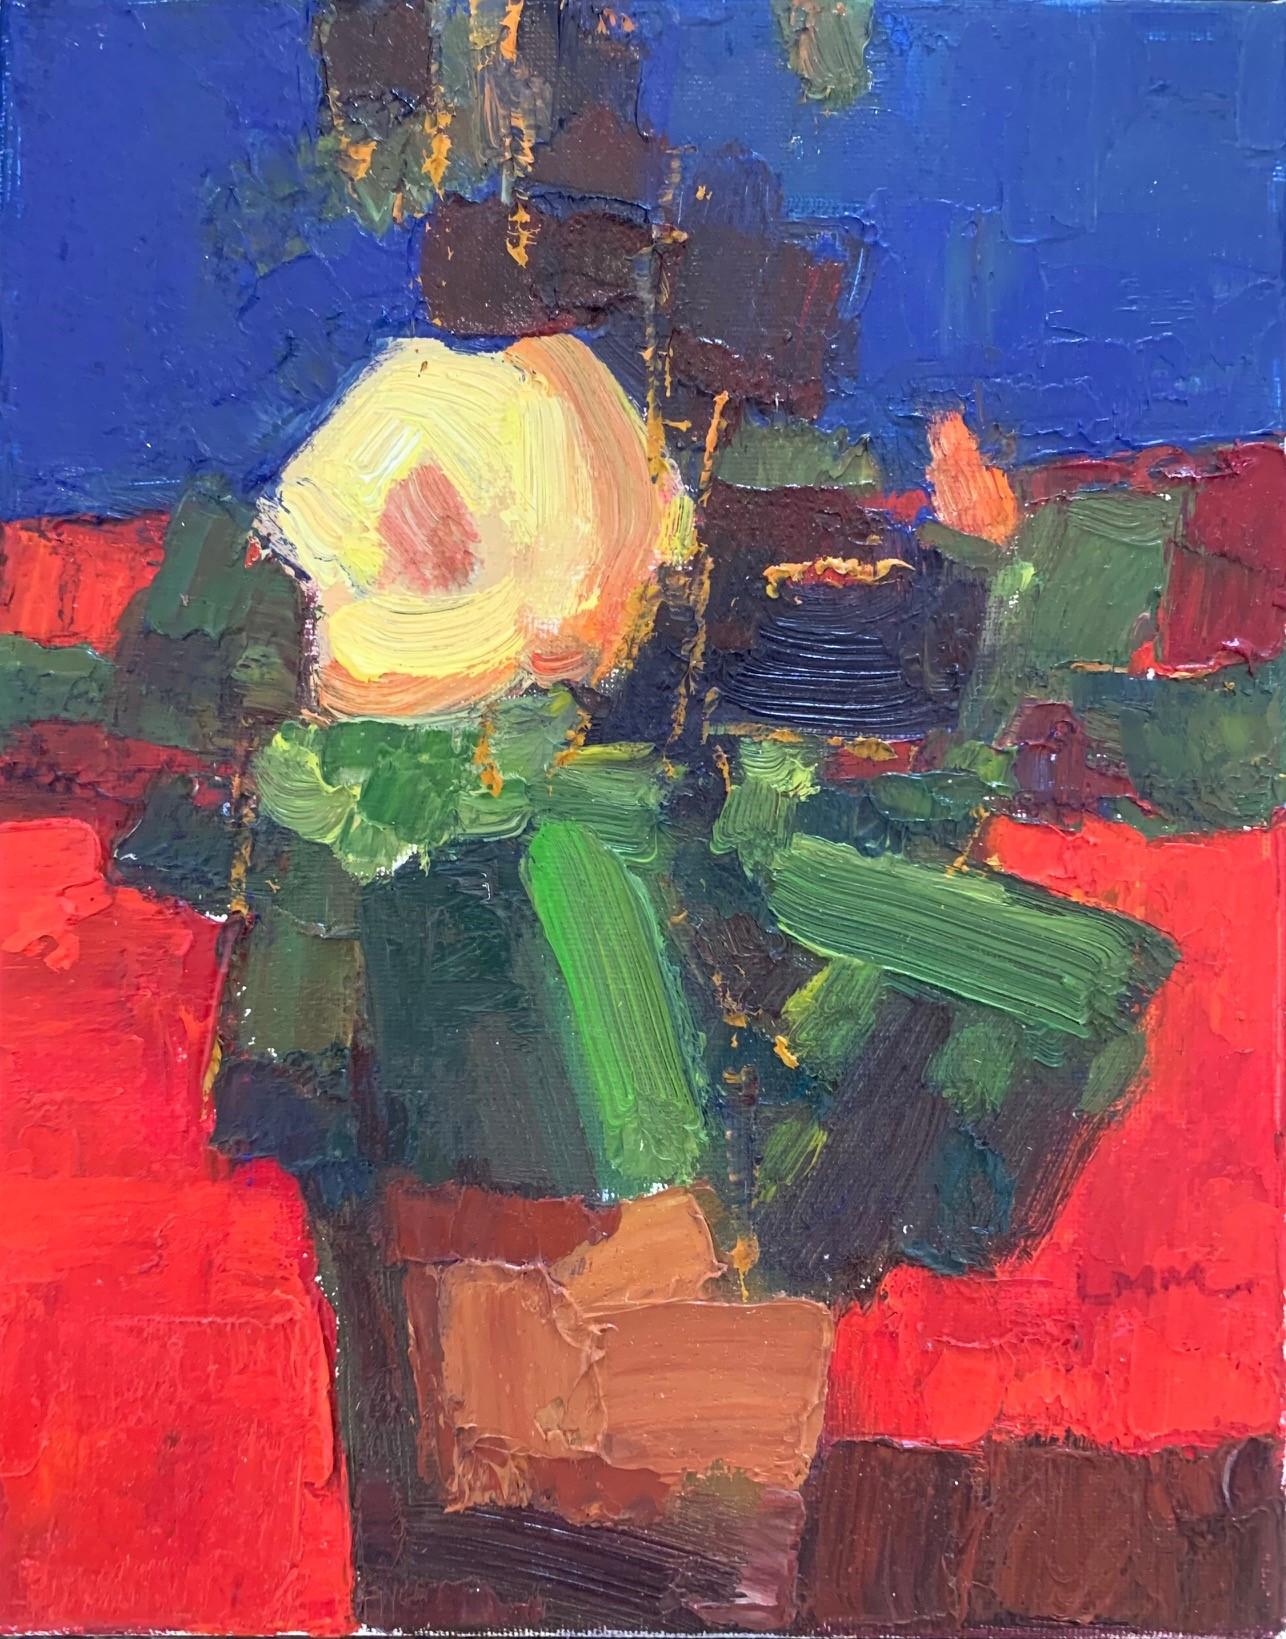 'Yellow Flower On A Red Table' Still Life oil on canvas by Ming Ming